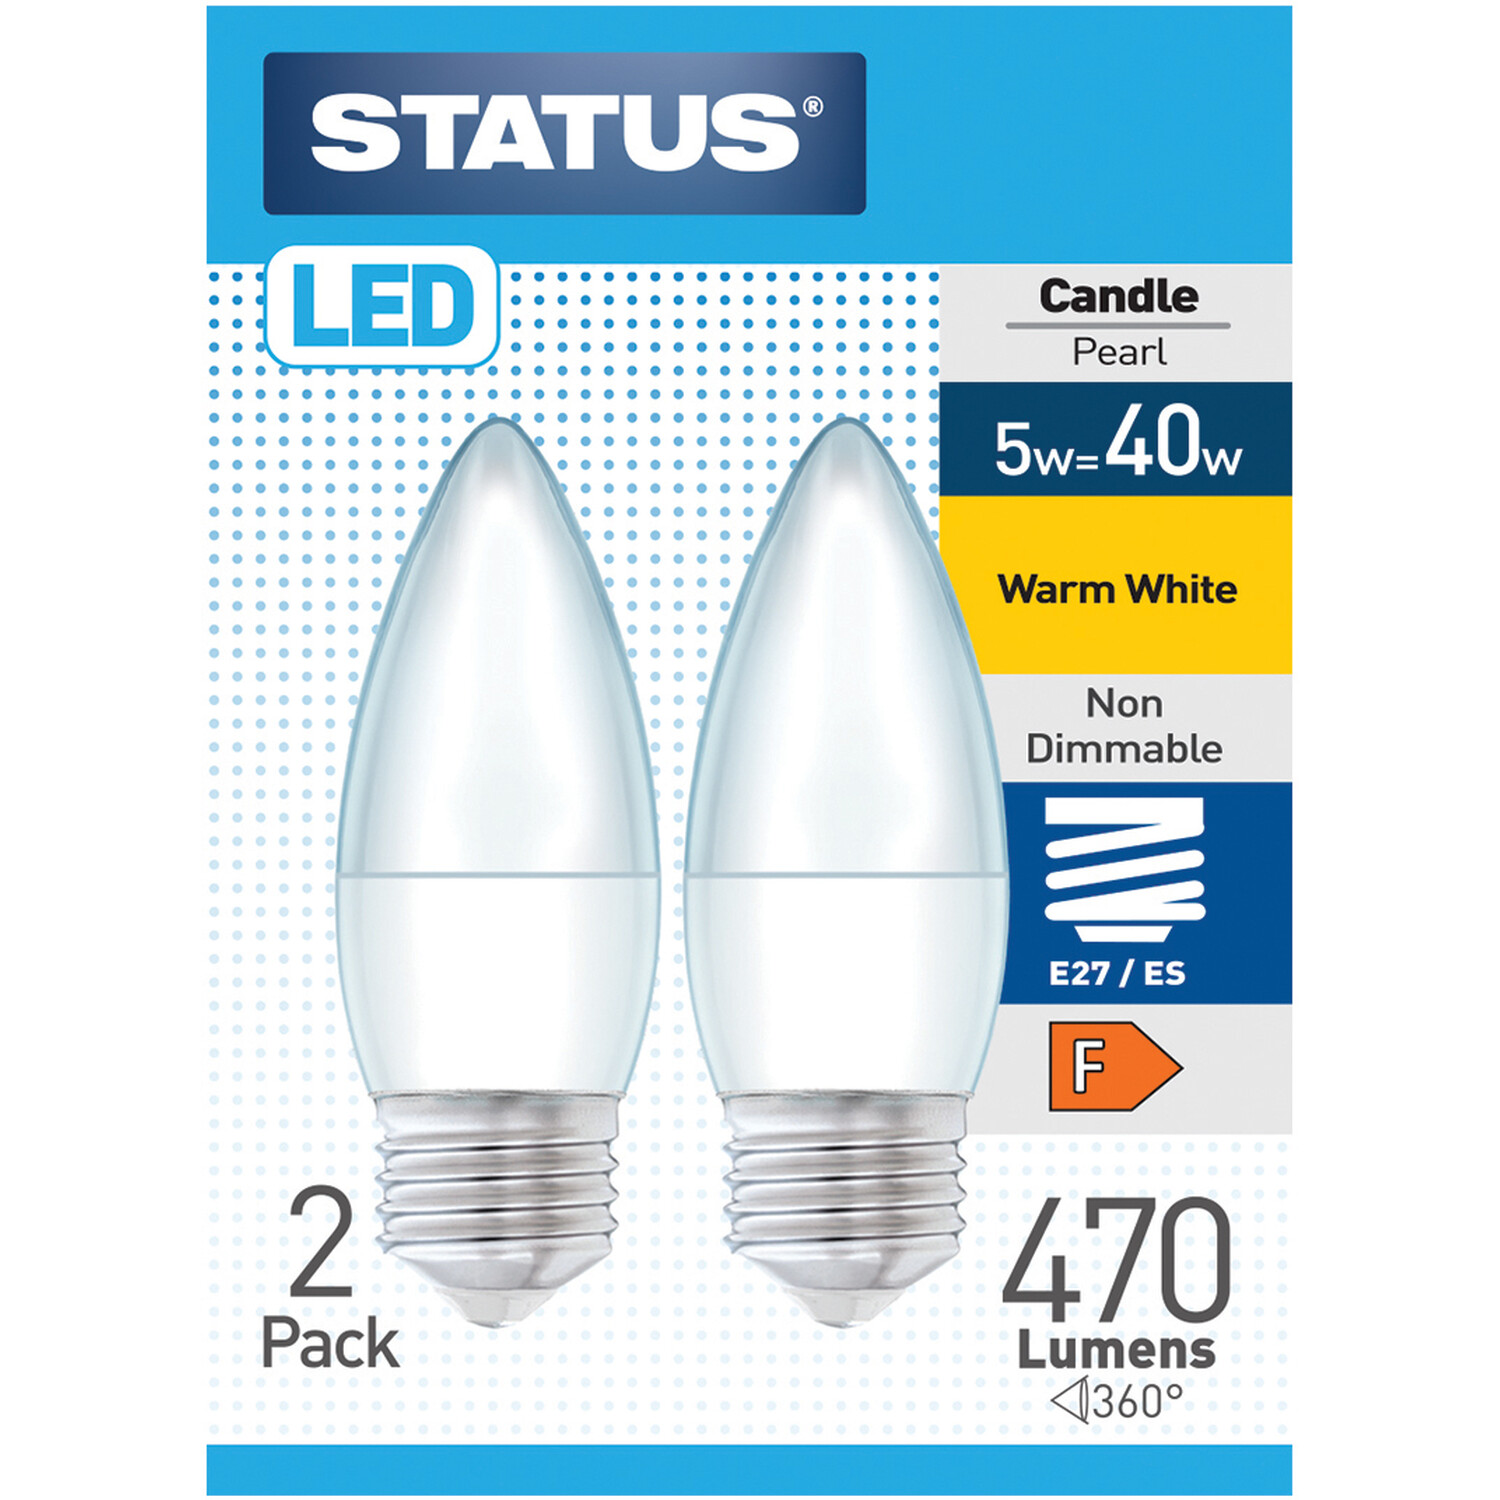 Pack of 2 Status LED Candle Pearl 5W Lightbulbs Image 1